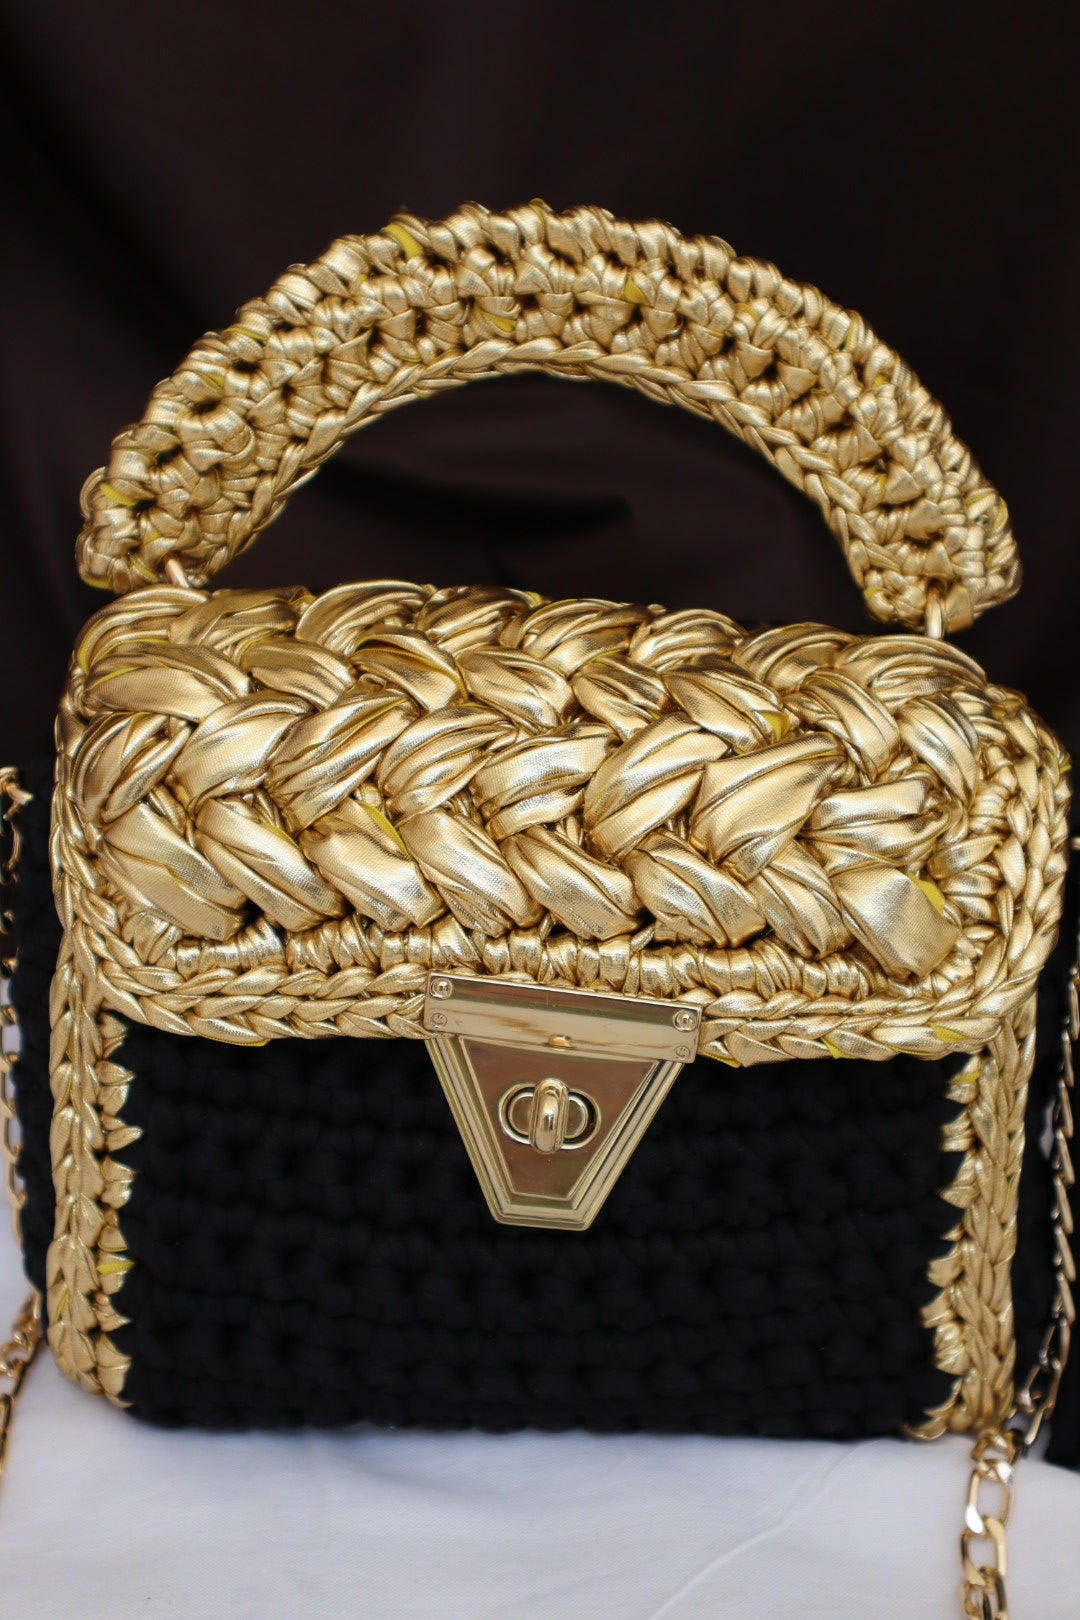 Luxurious Black and Gold Handcrafted Crochet Bag